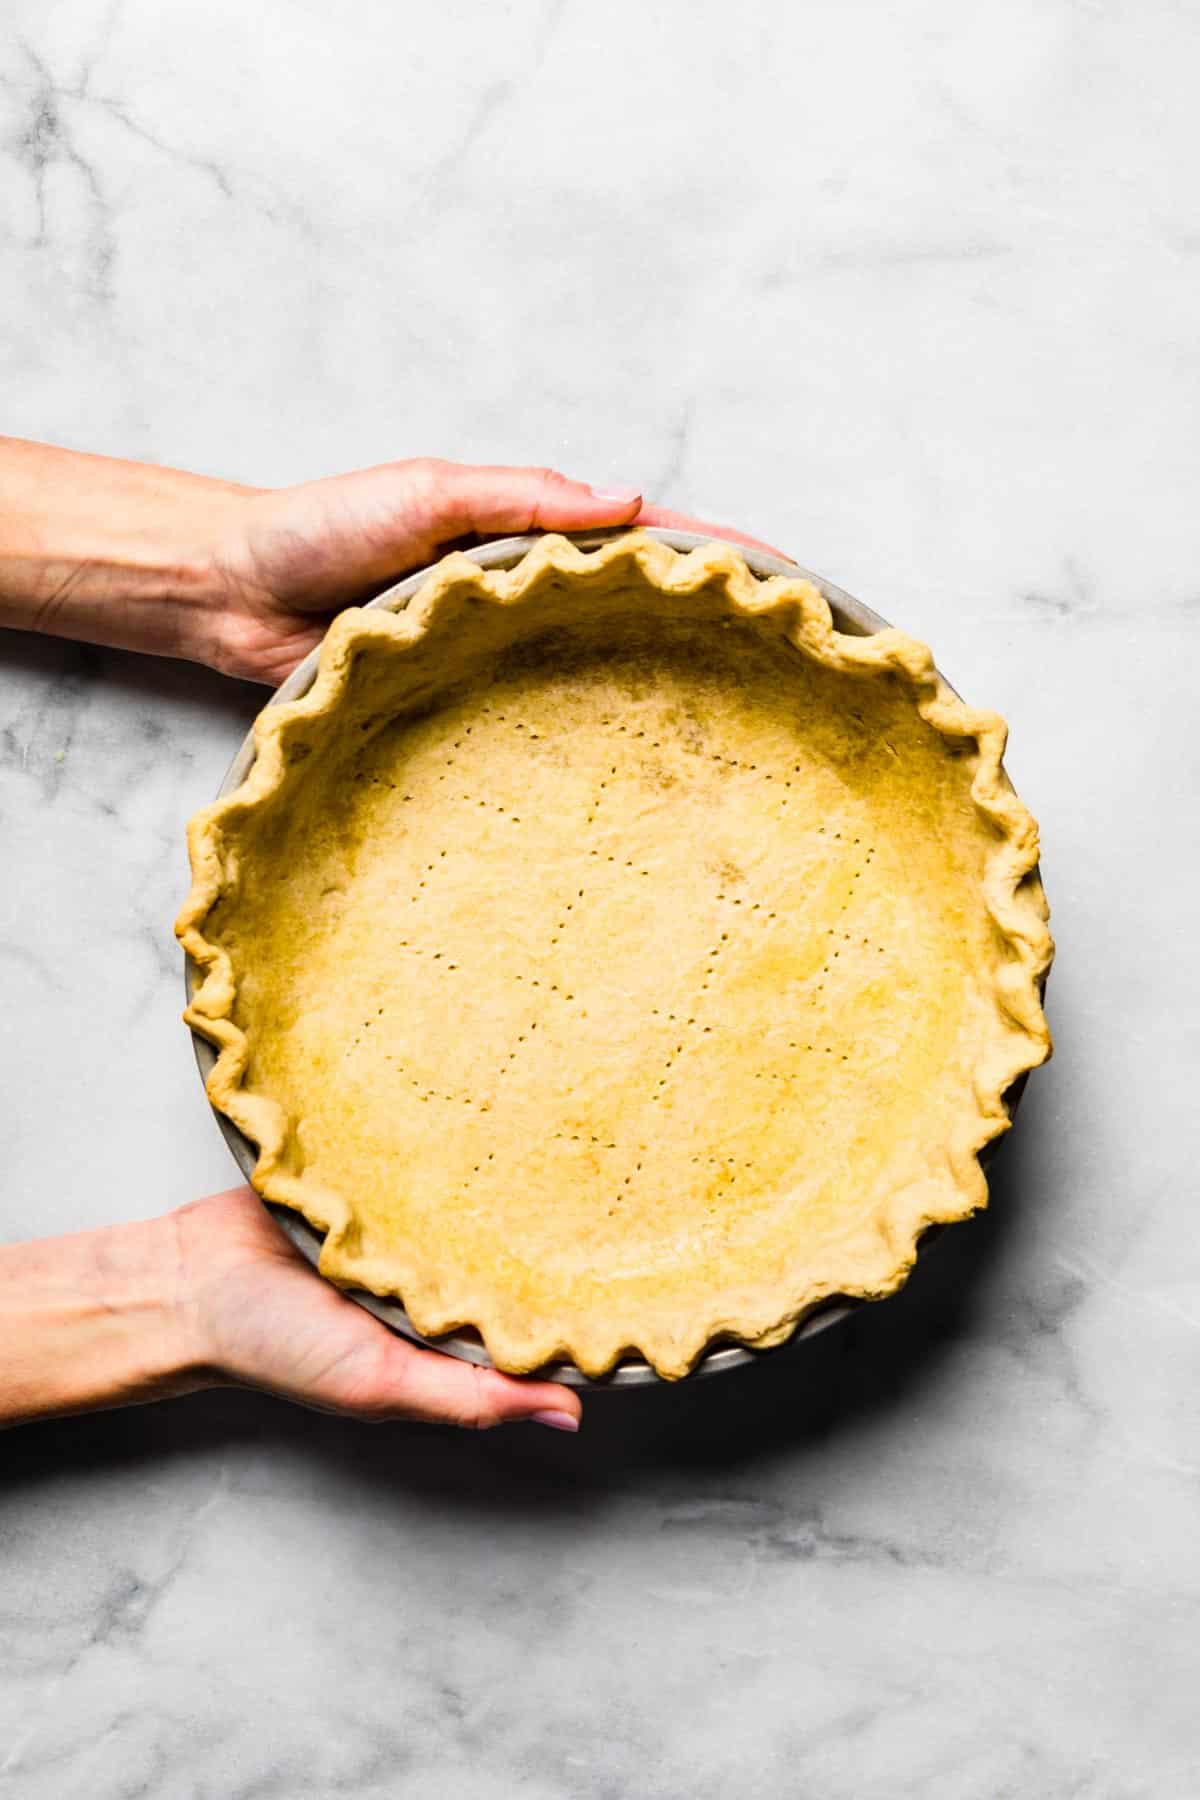 A woman's hands holding a docked gluten free pie crust that is par baked.